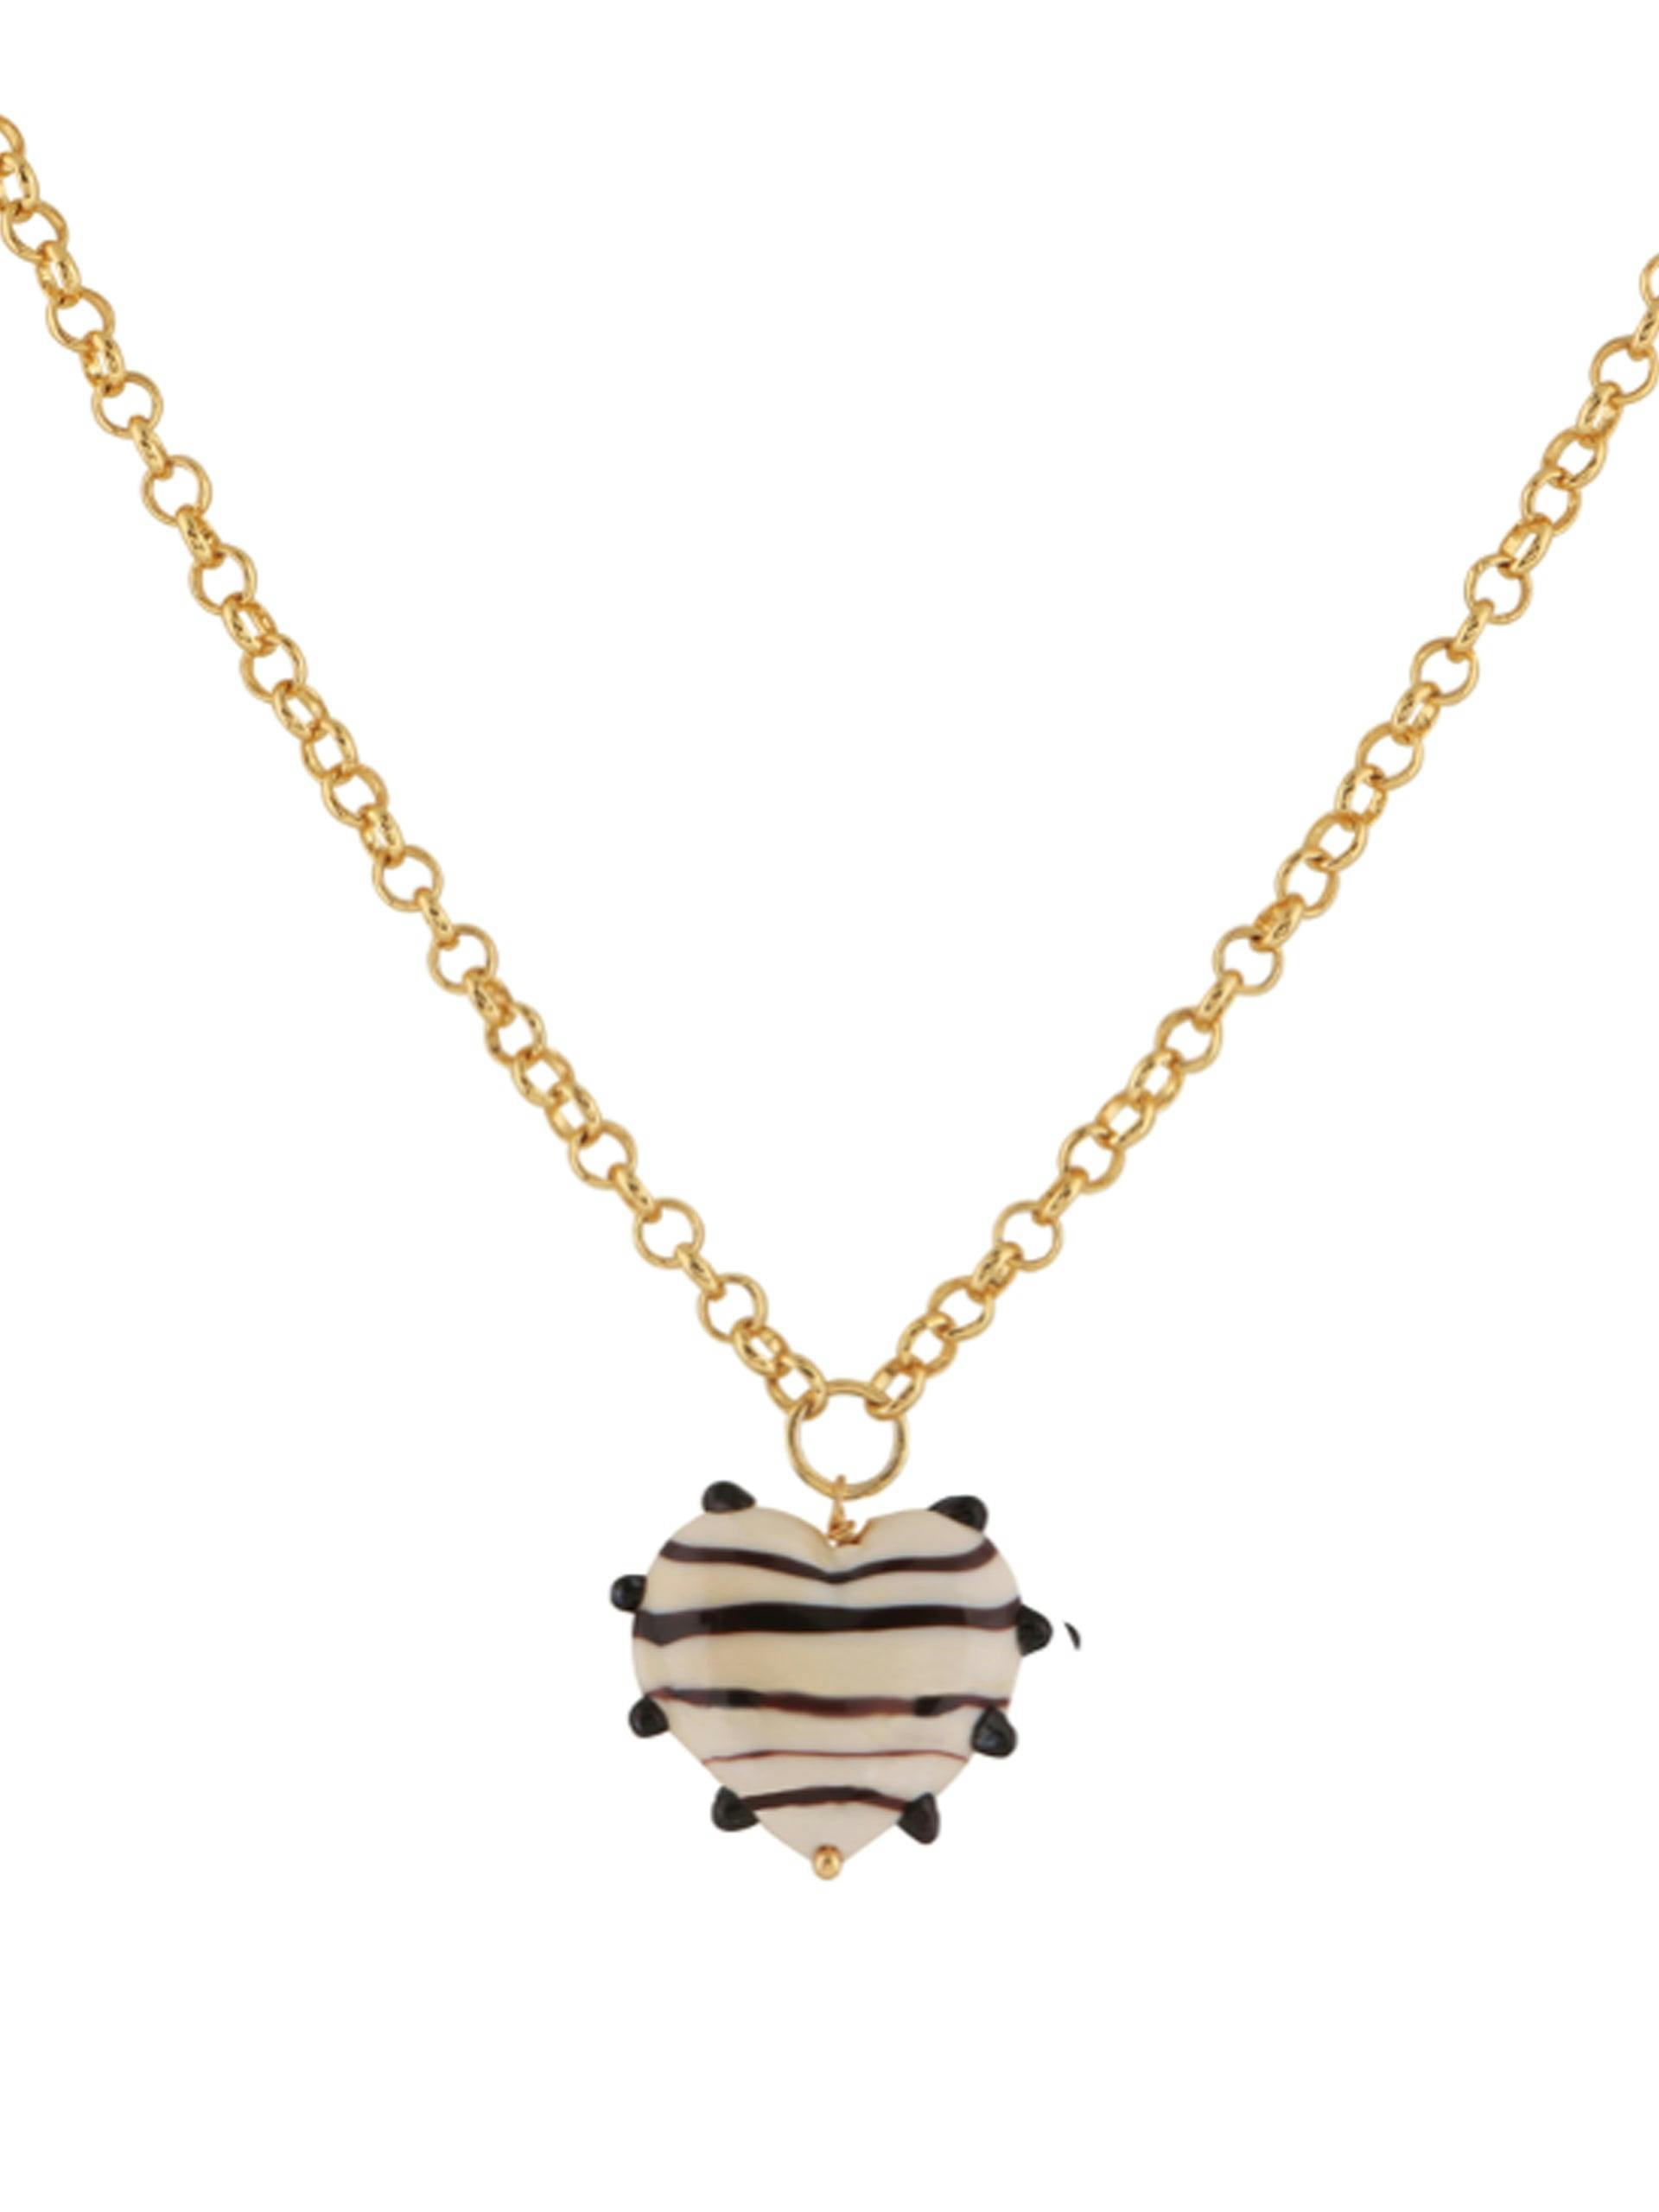 Extra-large ivory and black Milagros Heart and gold belcher chain necklace